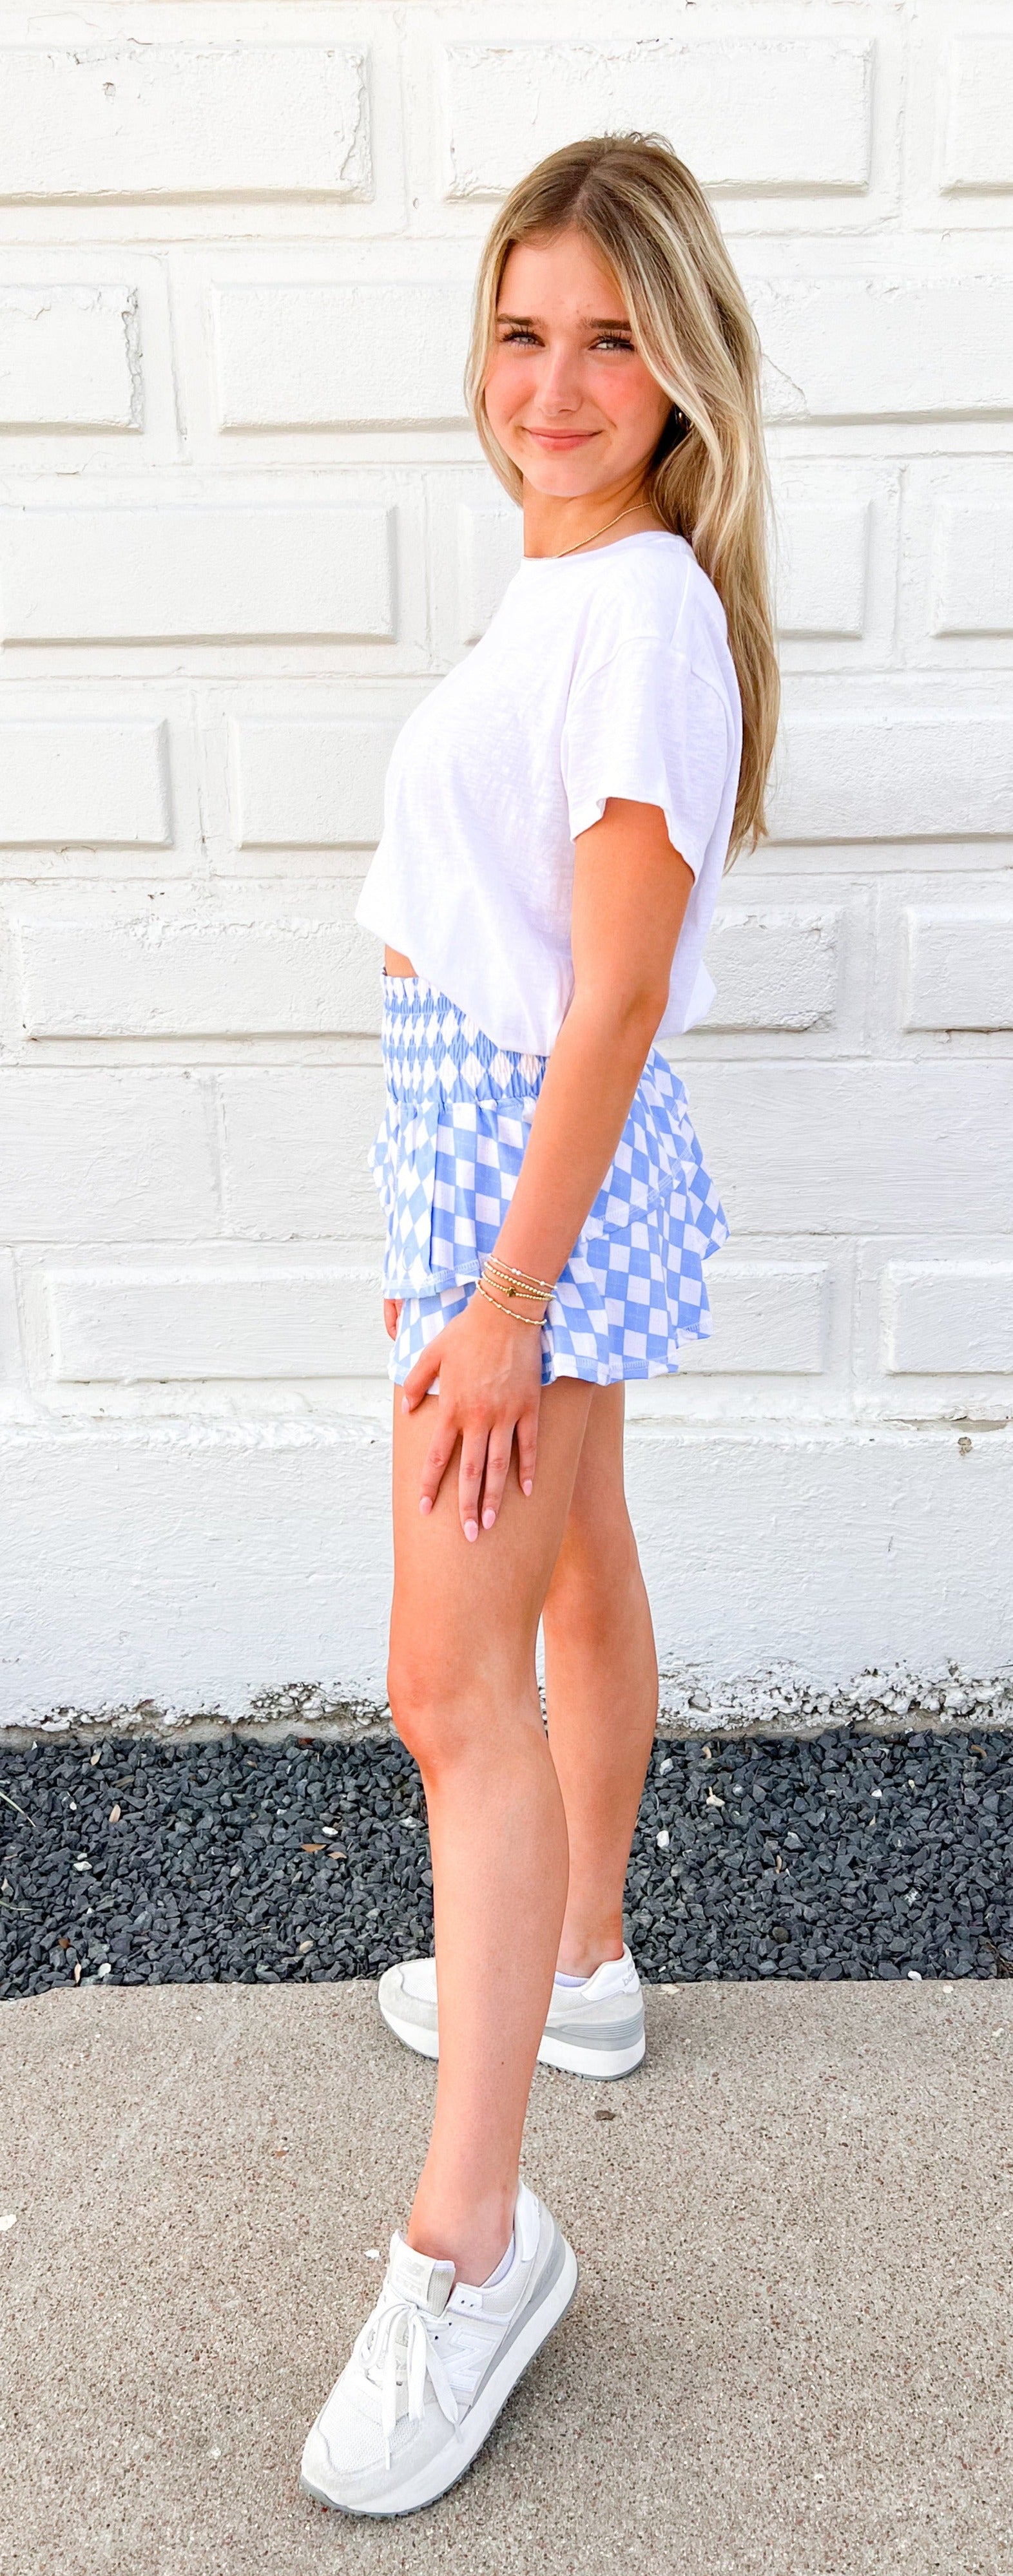 "On The Green" Plaid Skirt | The Bubble Lifestyle